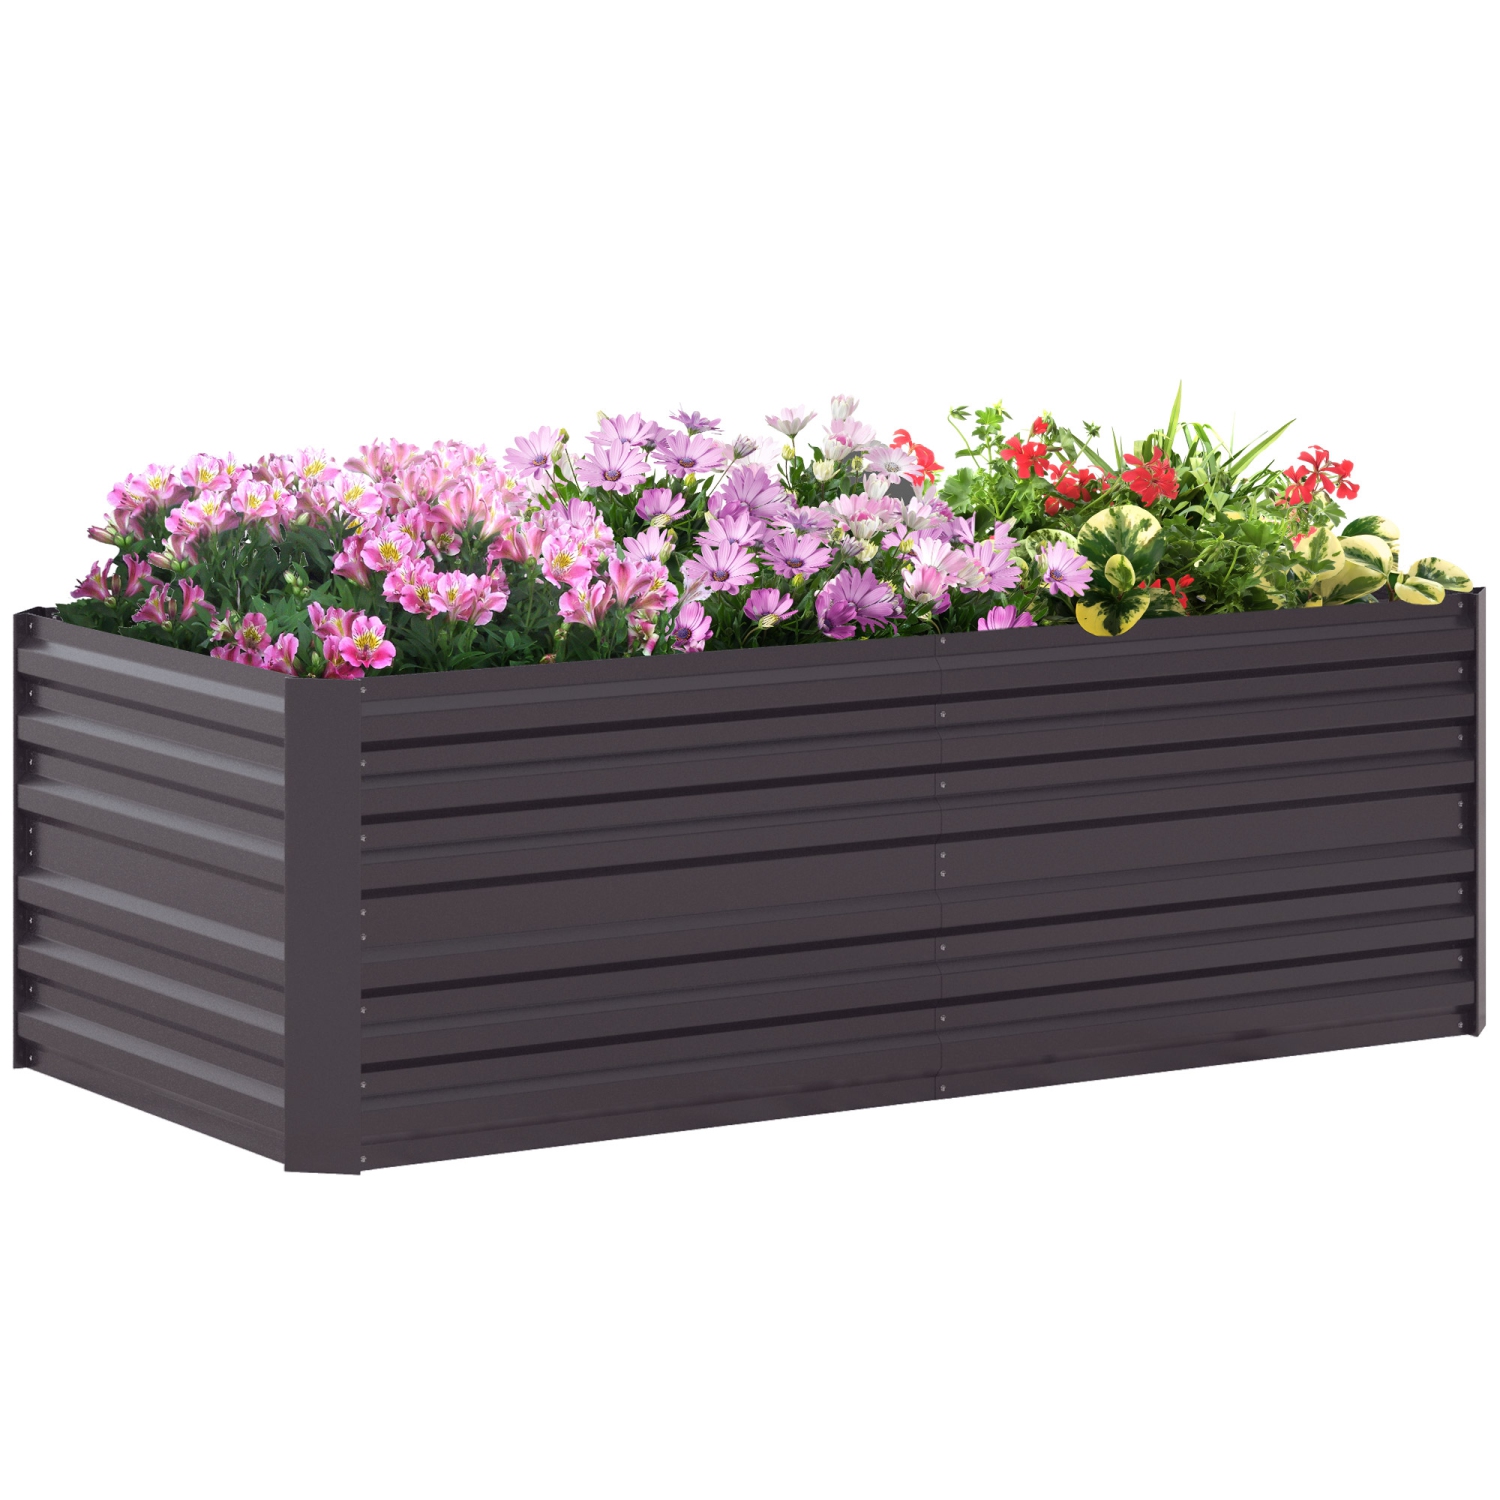 Outsunny Raised Garden Bed, 71" x 35" x 23" Galvanized Steel Planters for Outdoor Plants with Multi-reinforced Rods for Vegetables, Flowers and Herbs, Dark Grey